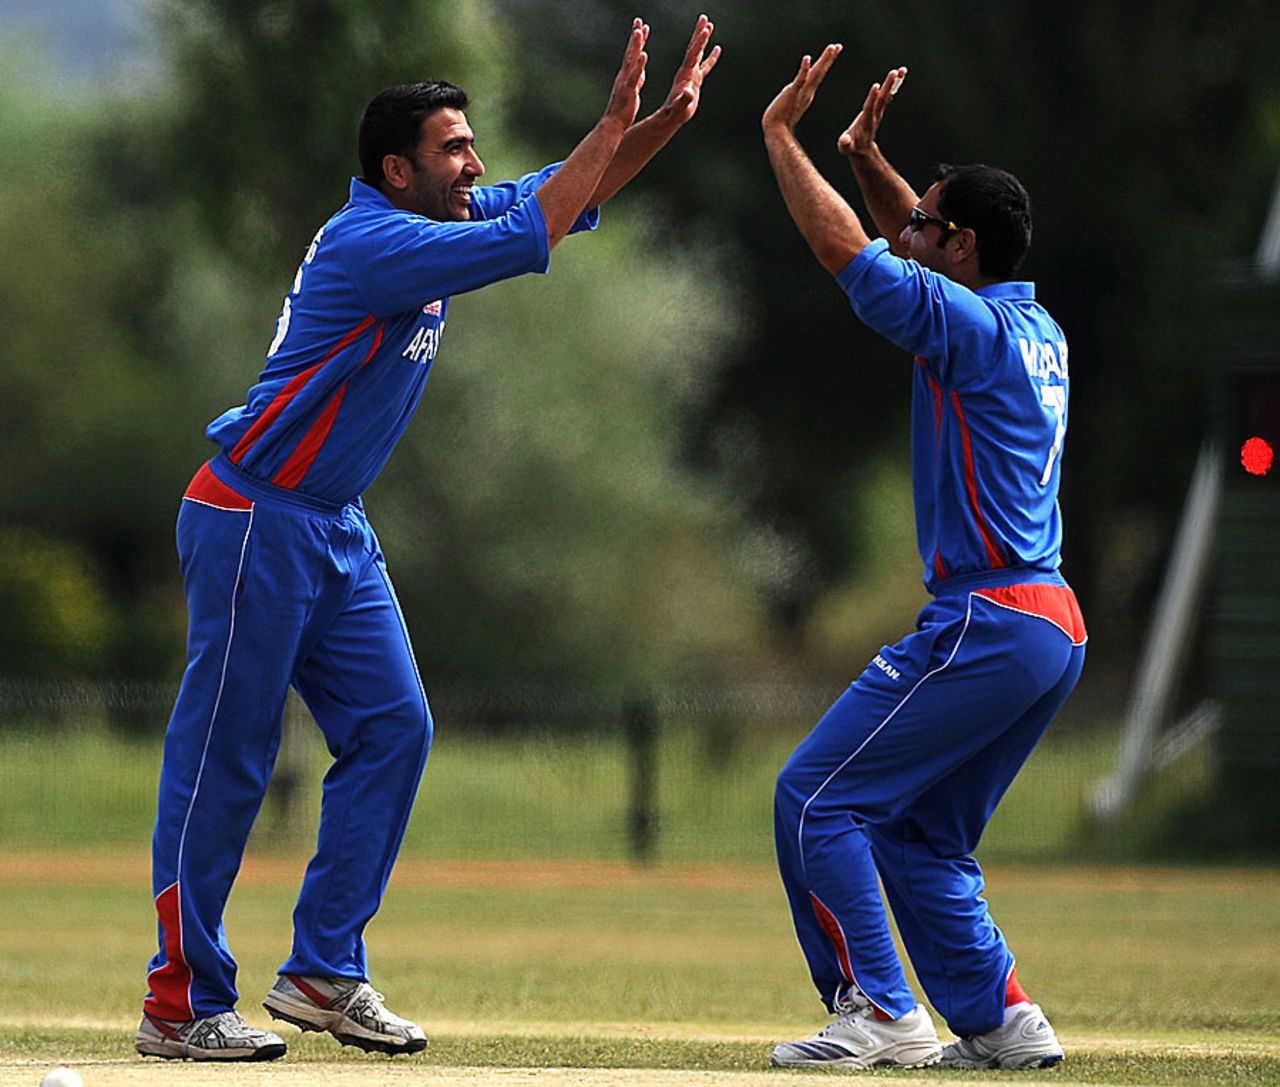 Khaliq Dad celebrates one of his three wickets, Netherlands v Afghanistan, ICC WCL Division 1, Voorburg, July 7, 2010